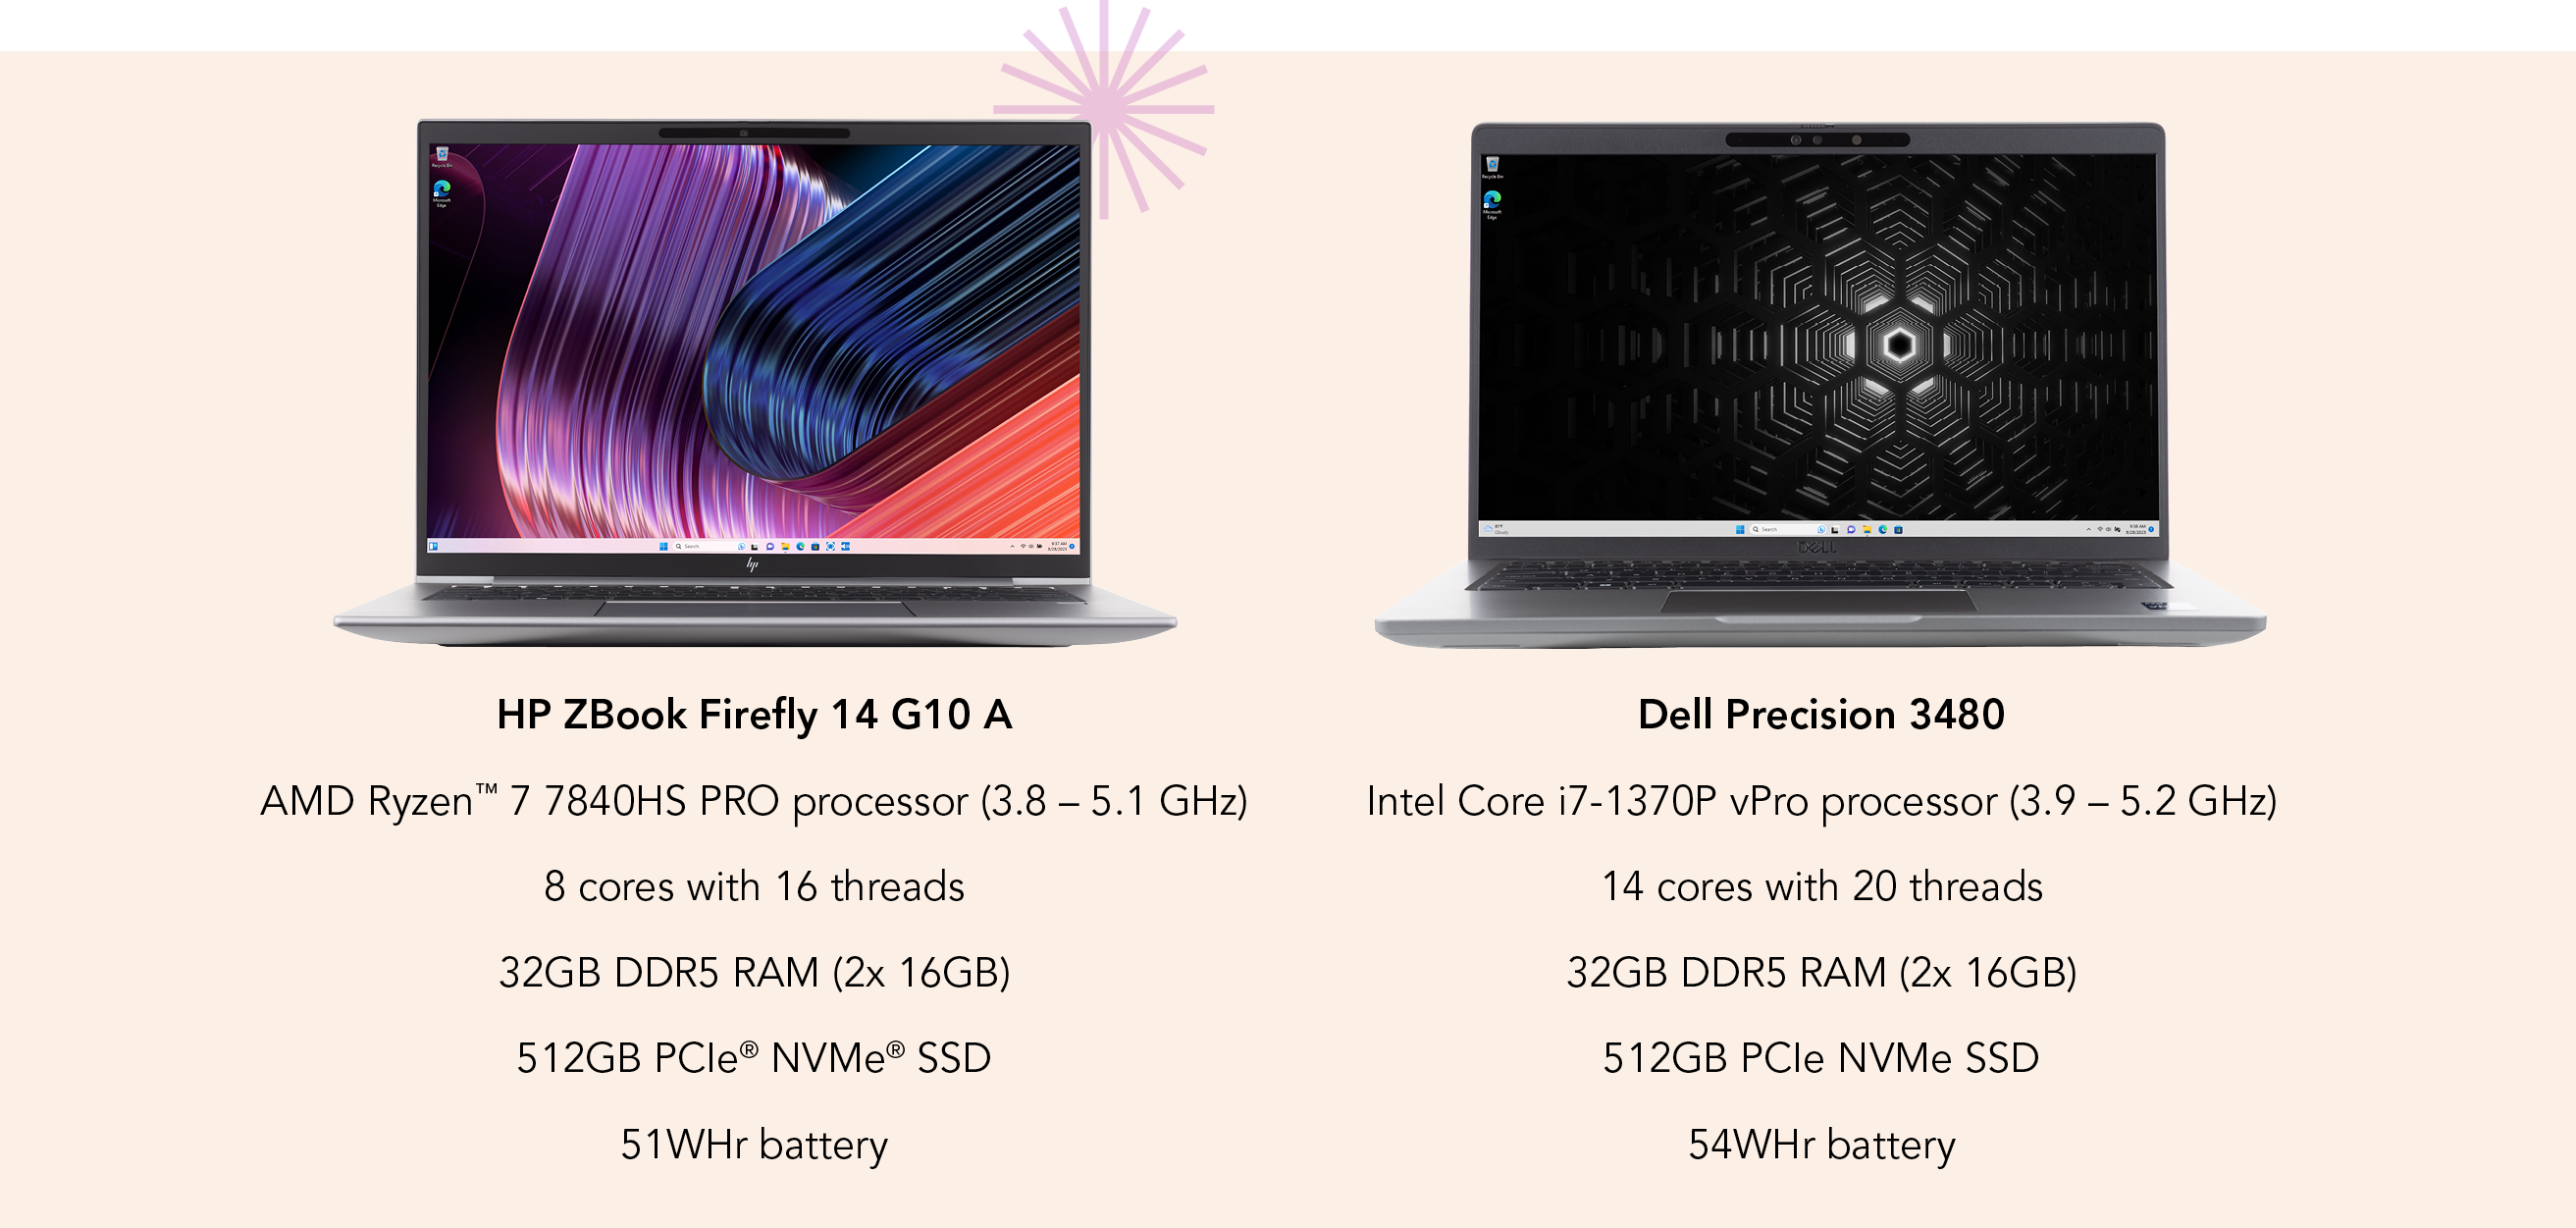 The HP ZBook Firefly 14 G10 A features an AMD Ryzen 7 7840HS PRO processor (3.8 – 5.1 GHz), 8 cores with 16 threads, 32GB DDR5 RAM (2x 16GB), 512GB PCIe NVMe SSD storage, and a 51WHr battery. The Dell Precision 3480 features an Intel Core i7-1370P vPro processor (3.9 – 5.2 GHz), 14 cores with 20 threads, 32GB DDR5 RAM (2x 16GB), 512GB PCIe NVMe SSD storage, and a 54WHr battery.